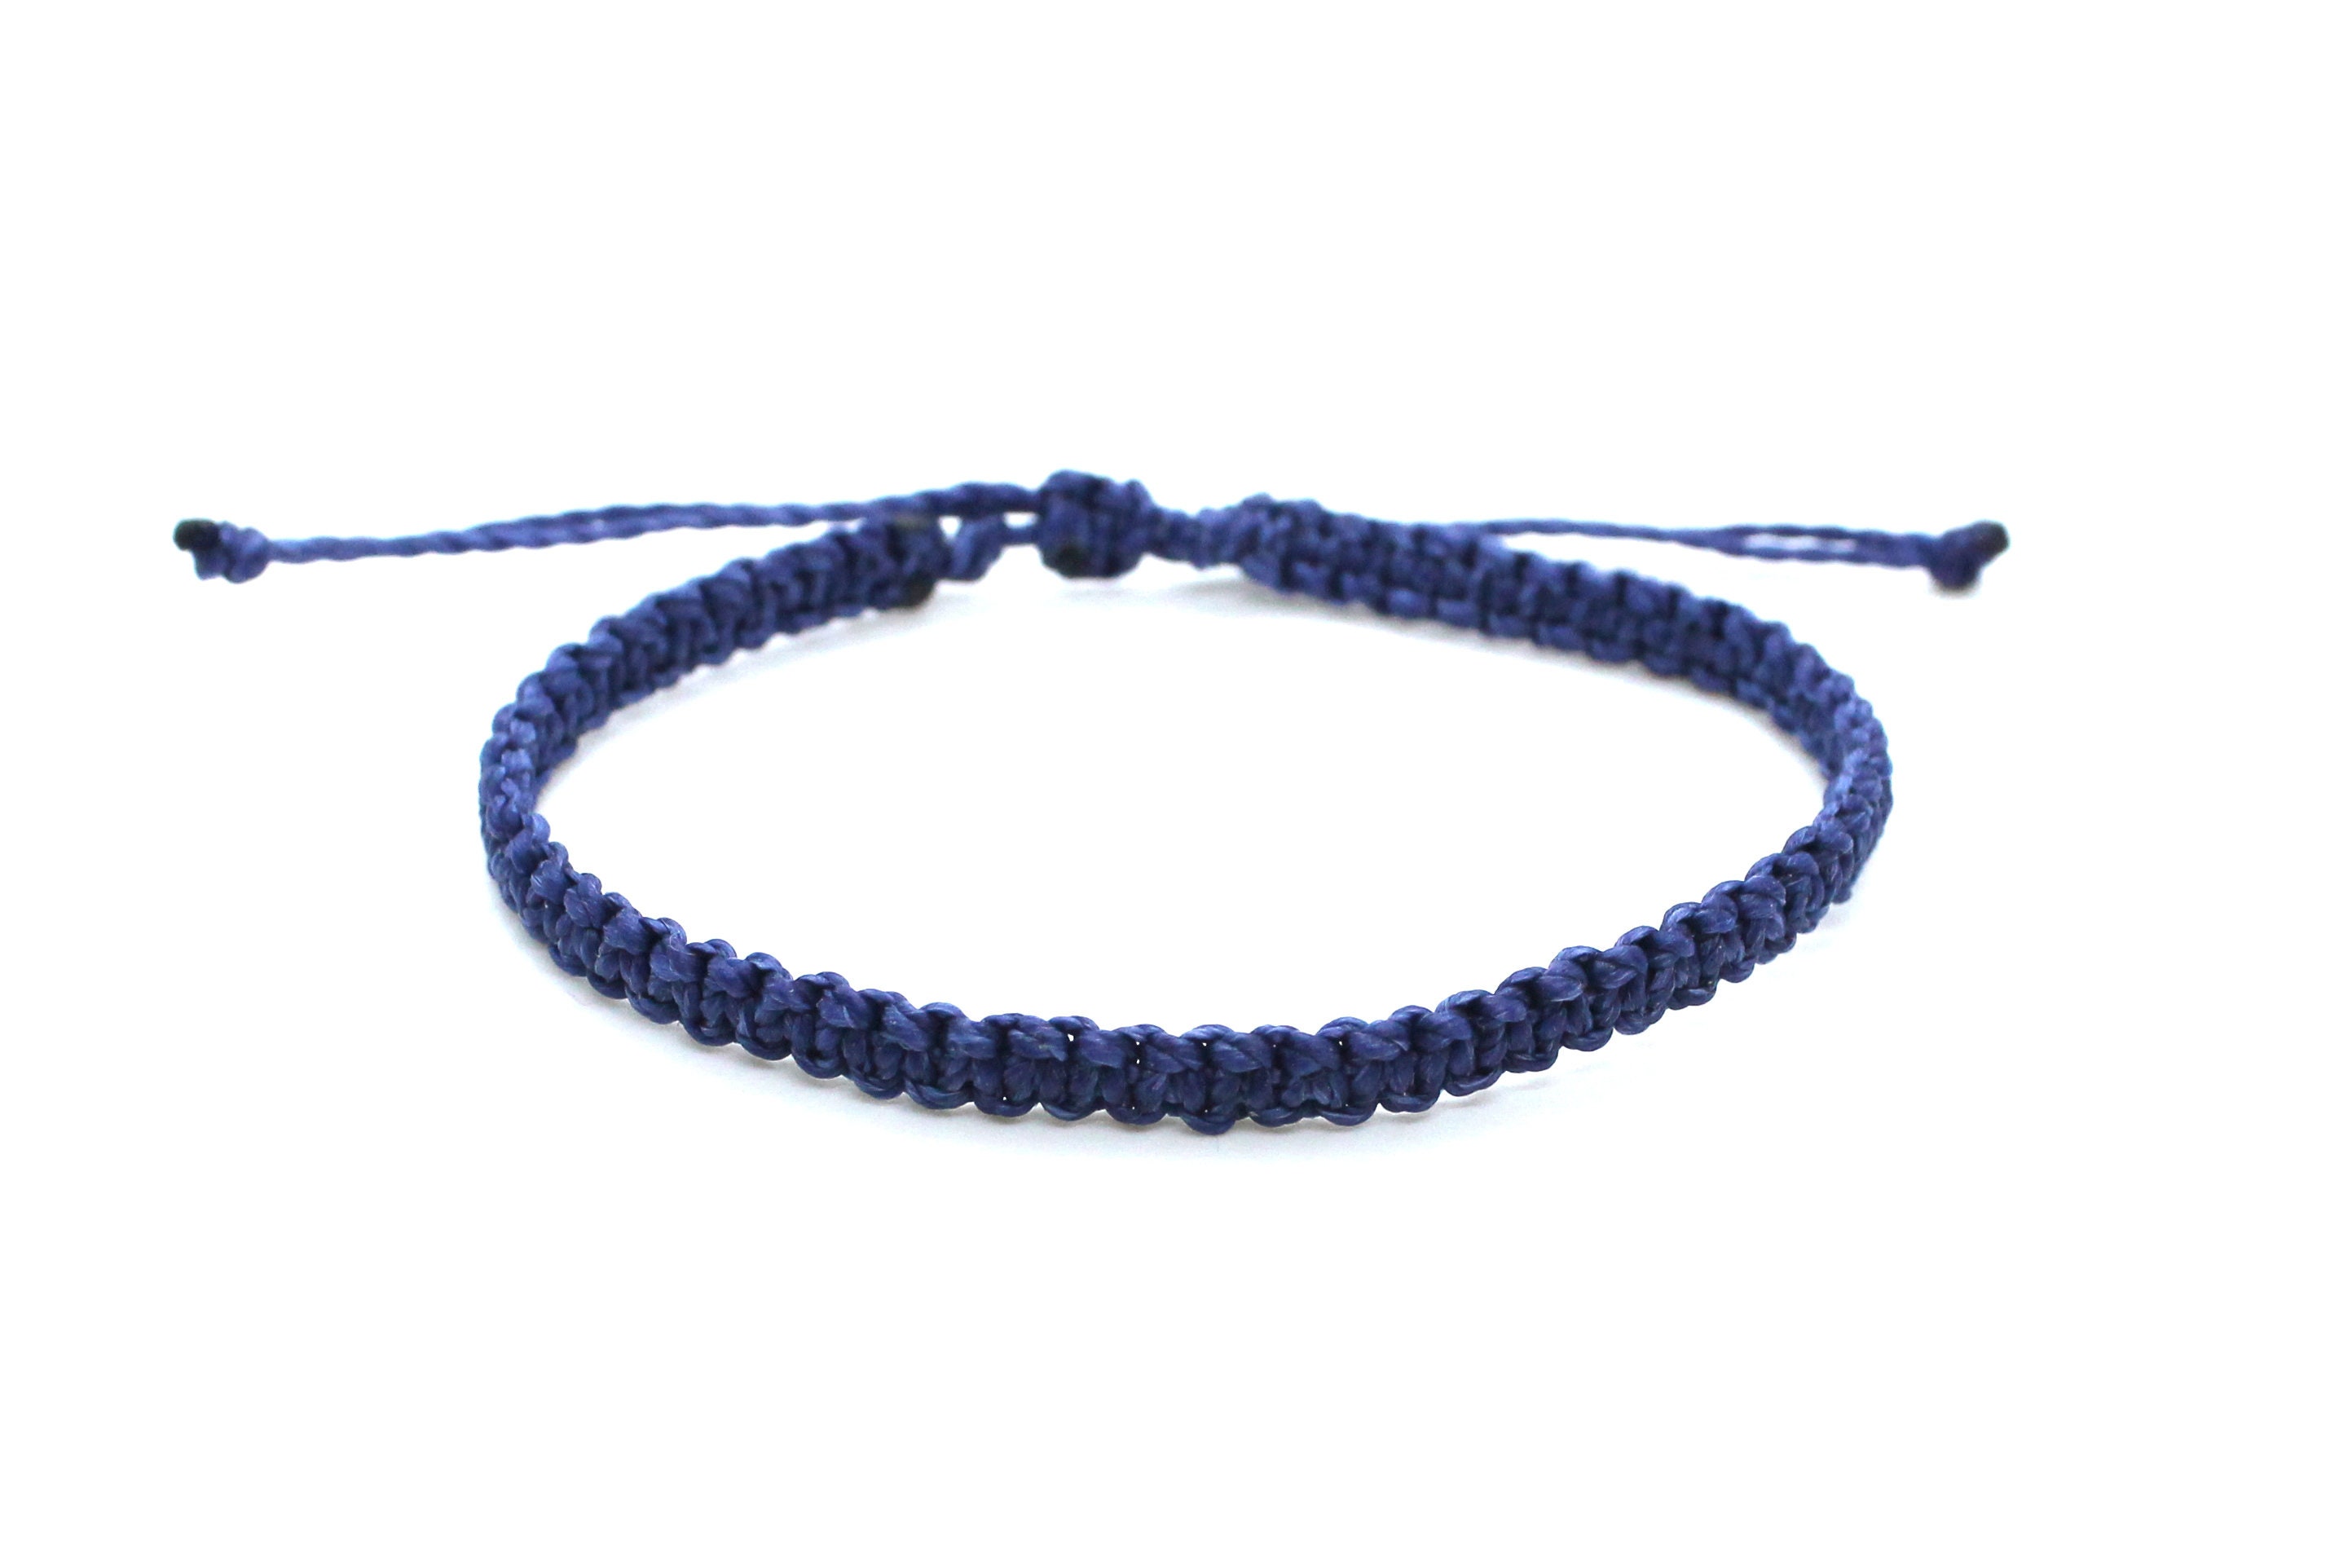 Navy Blue Beads Jeans Hand Made, Classy, Fashion, Modern, Fancy Bracelet  for Women and Girls 4270012. : Amazon.in: Jewellery